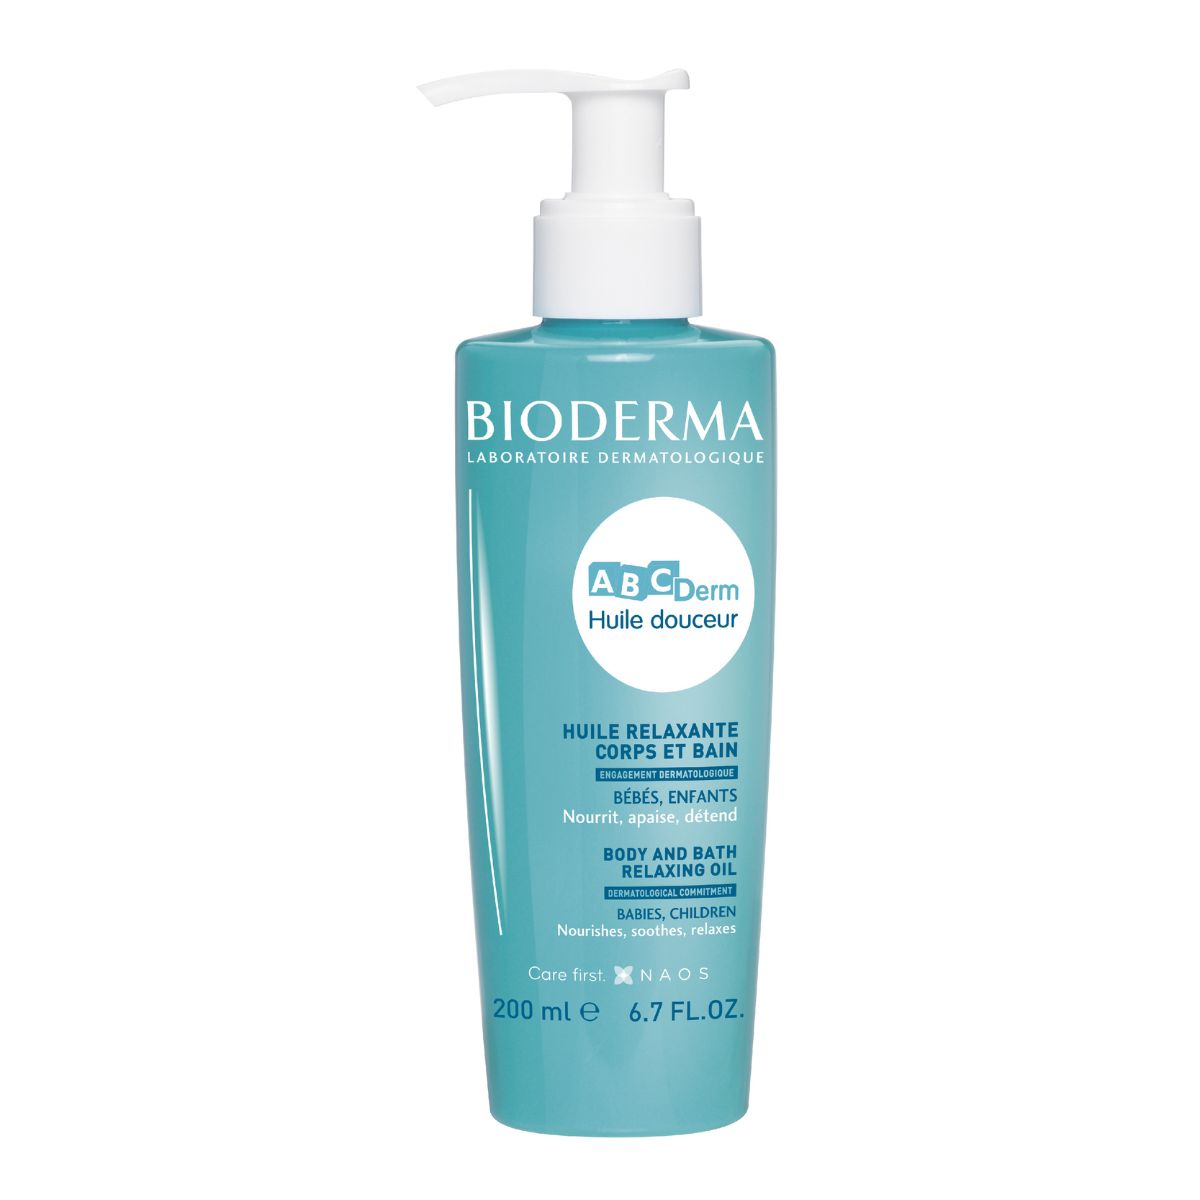 Bioderma ABCDerm Body and Bath Relaxing Oil